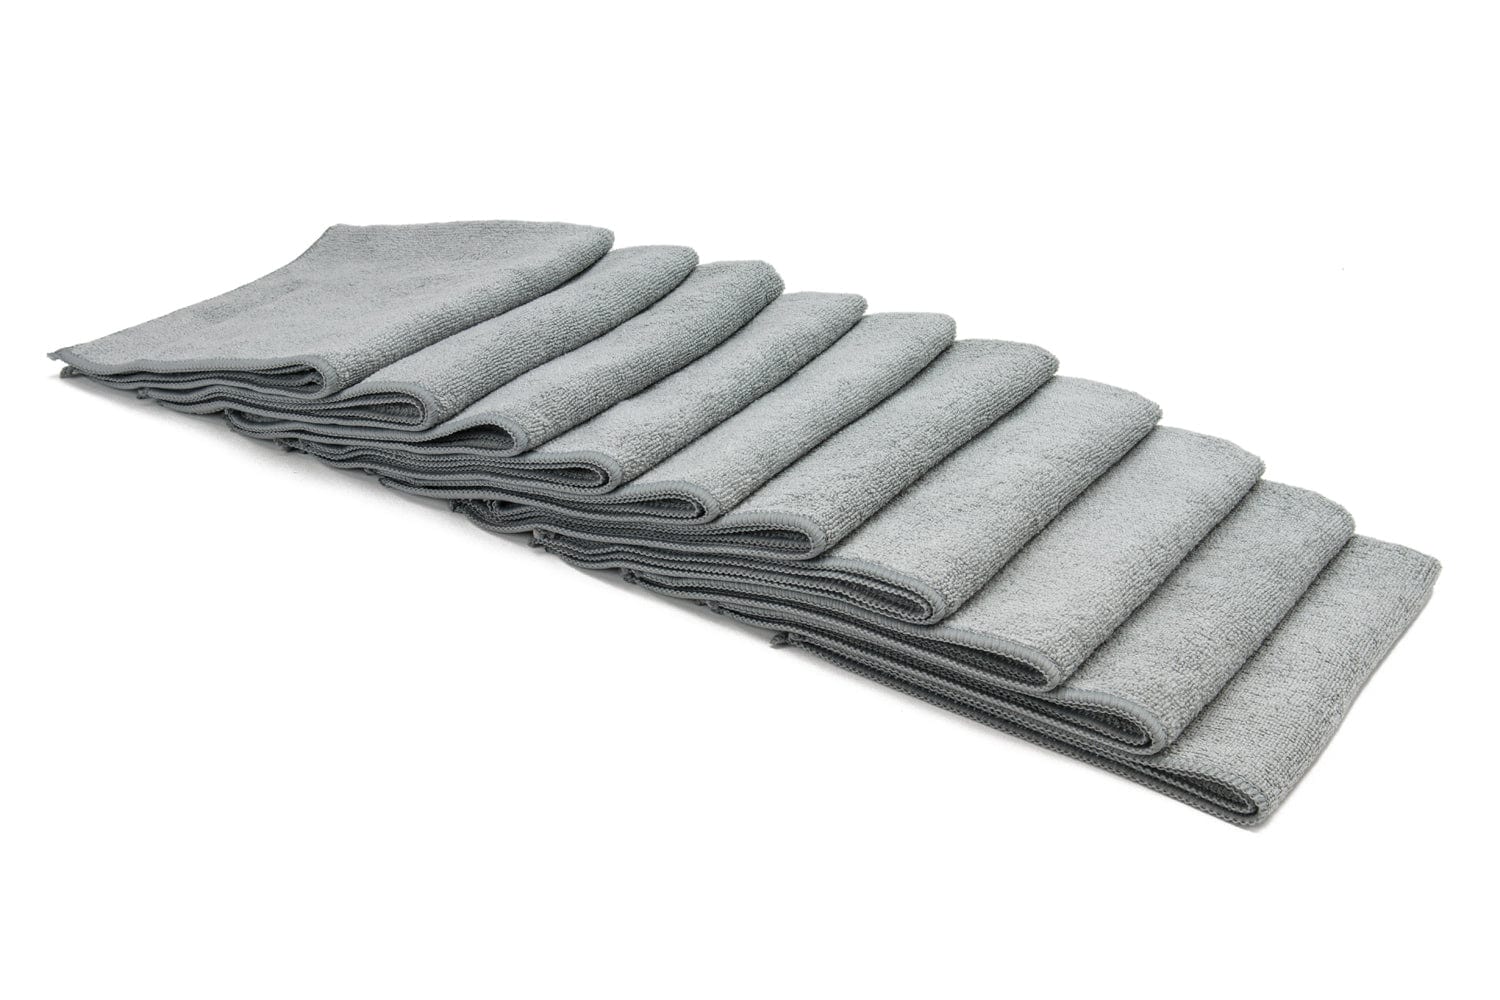 Autofiber Gray / Stitched [Utility 300] All-Purpose Edgeless Microfiber Towel (16 in x 16 in., 300 gsm) 10pack